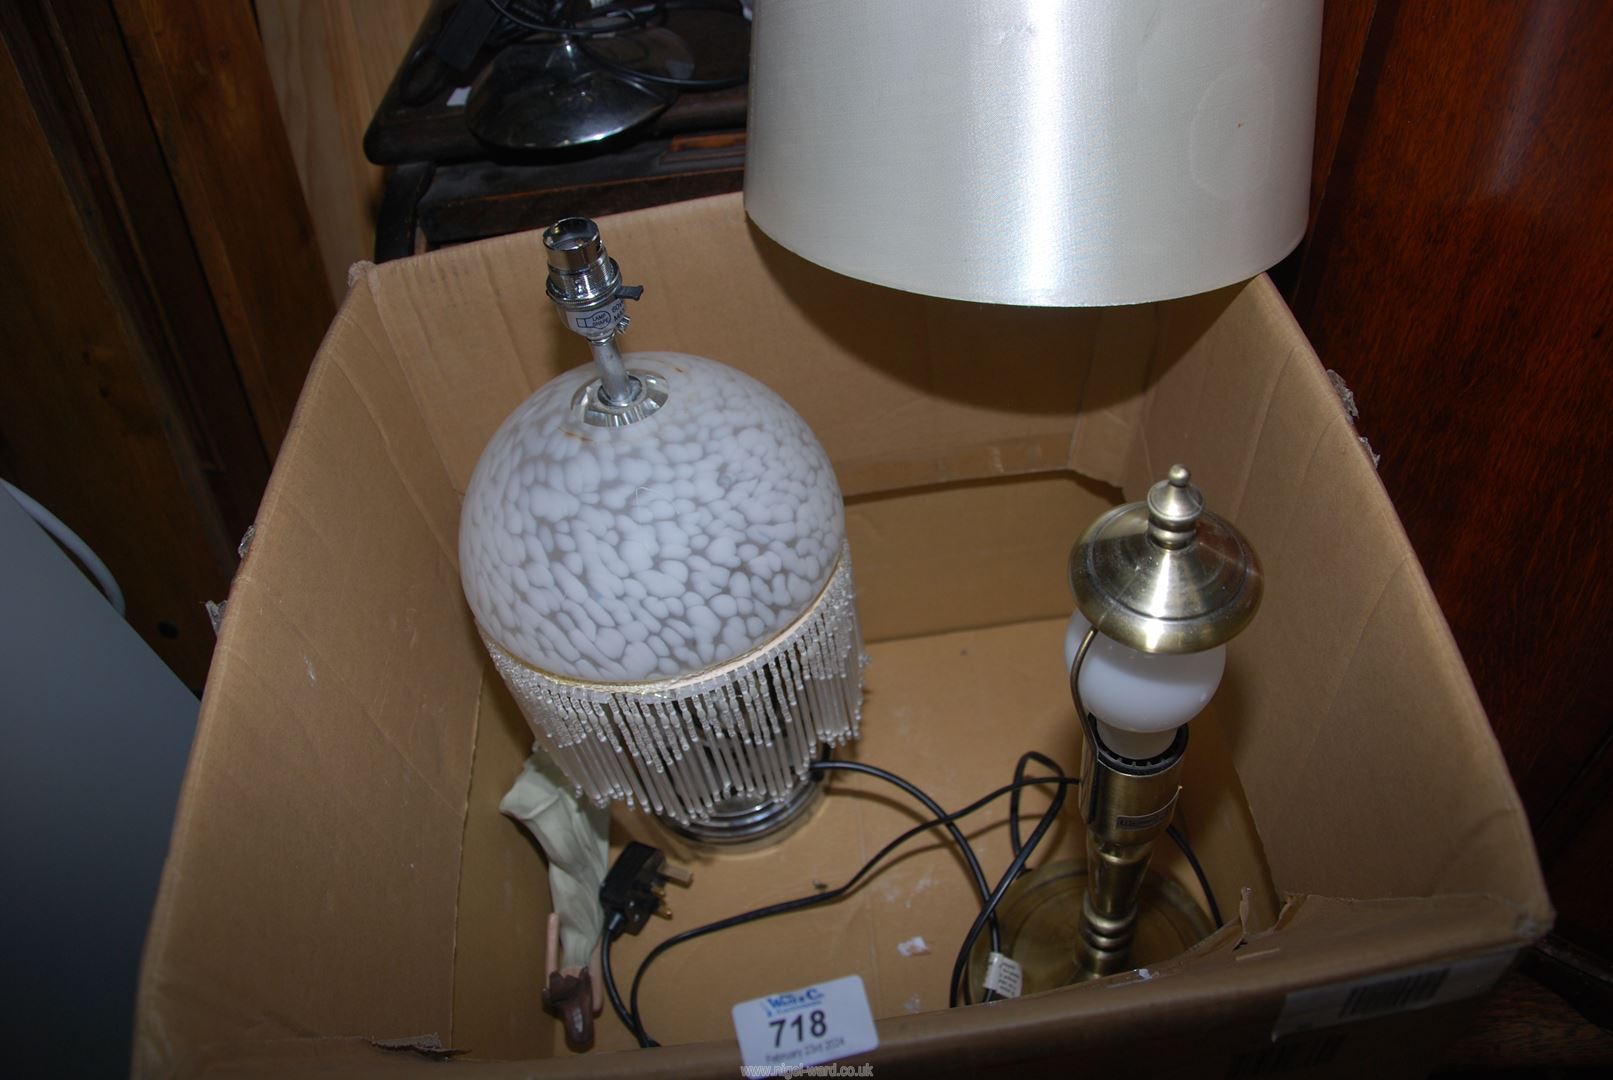 A box of table lamps and shades.